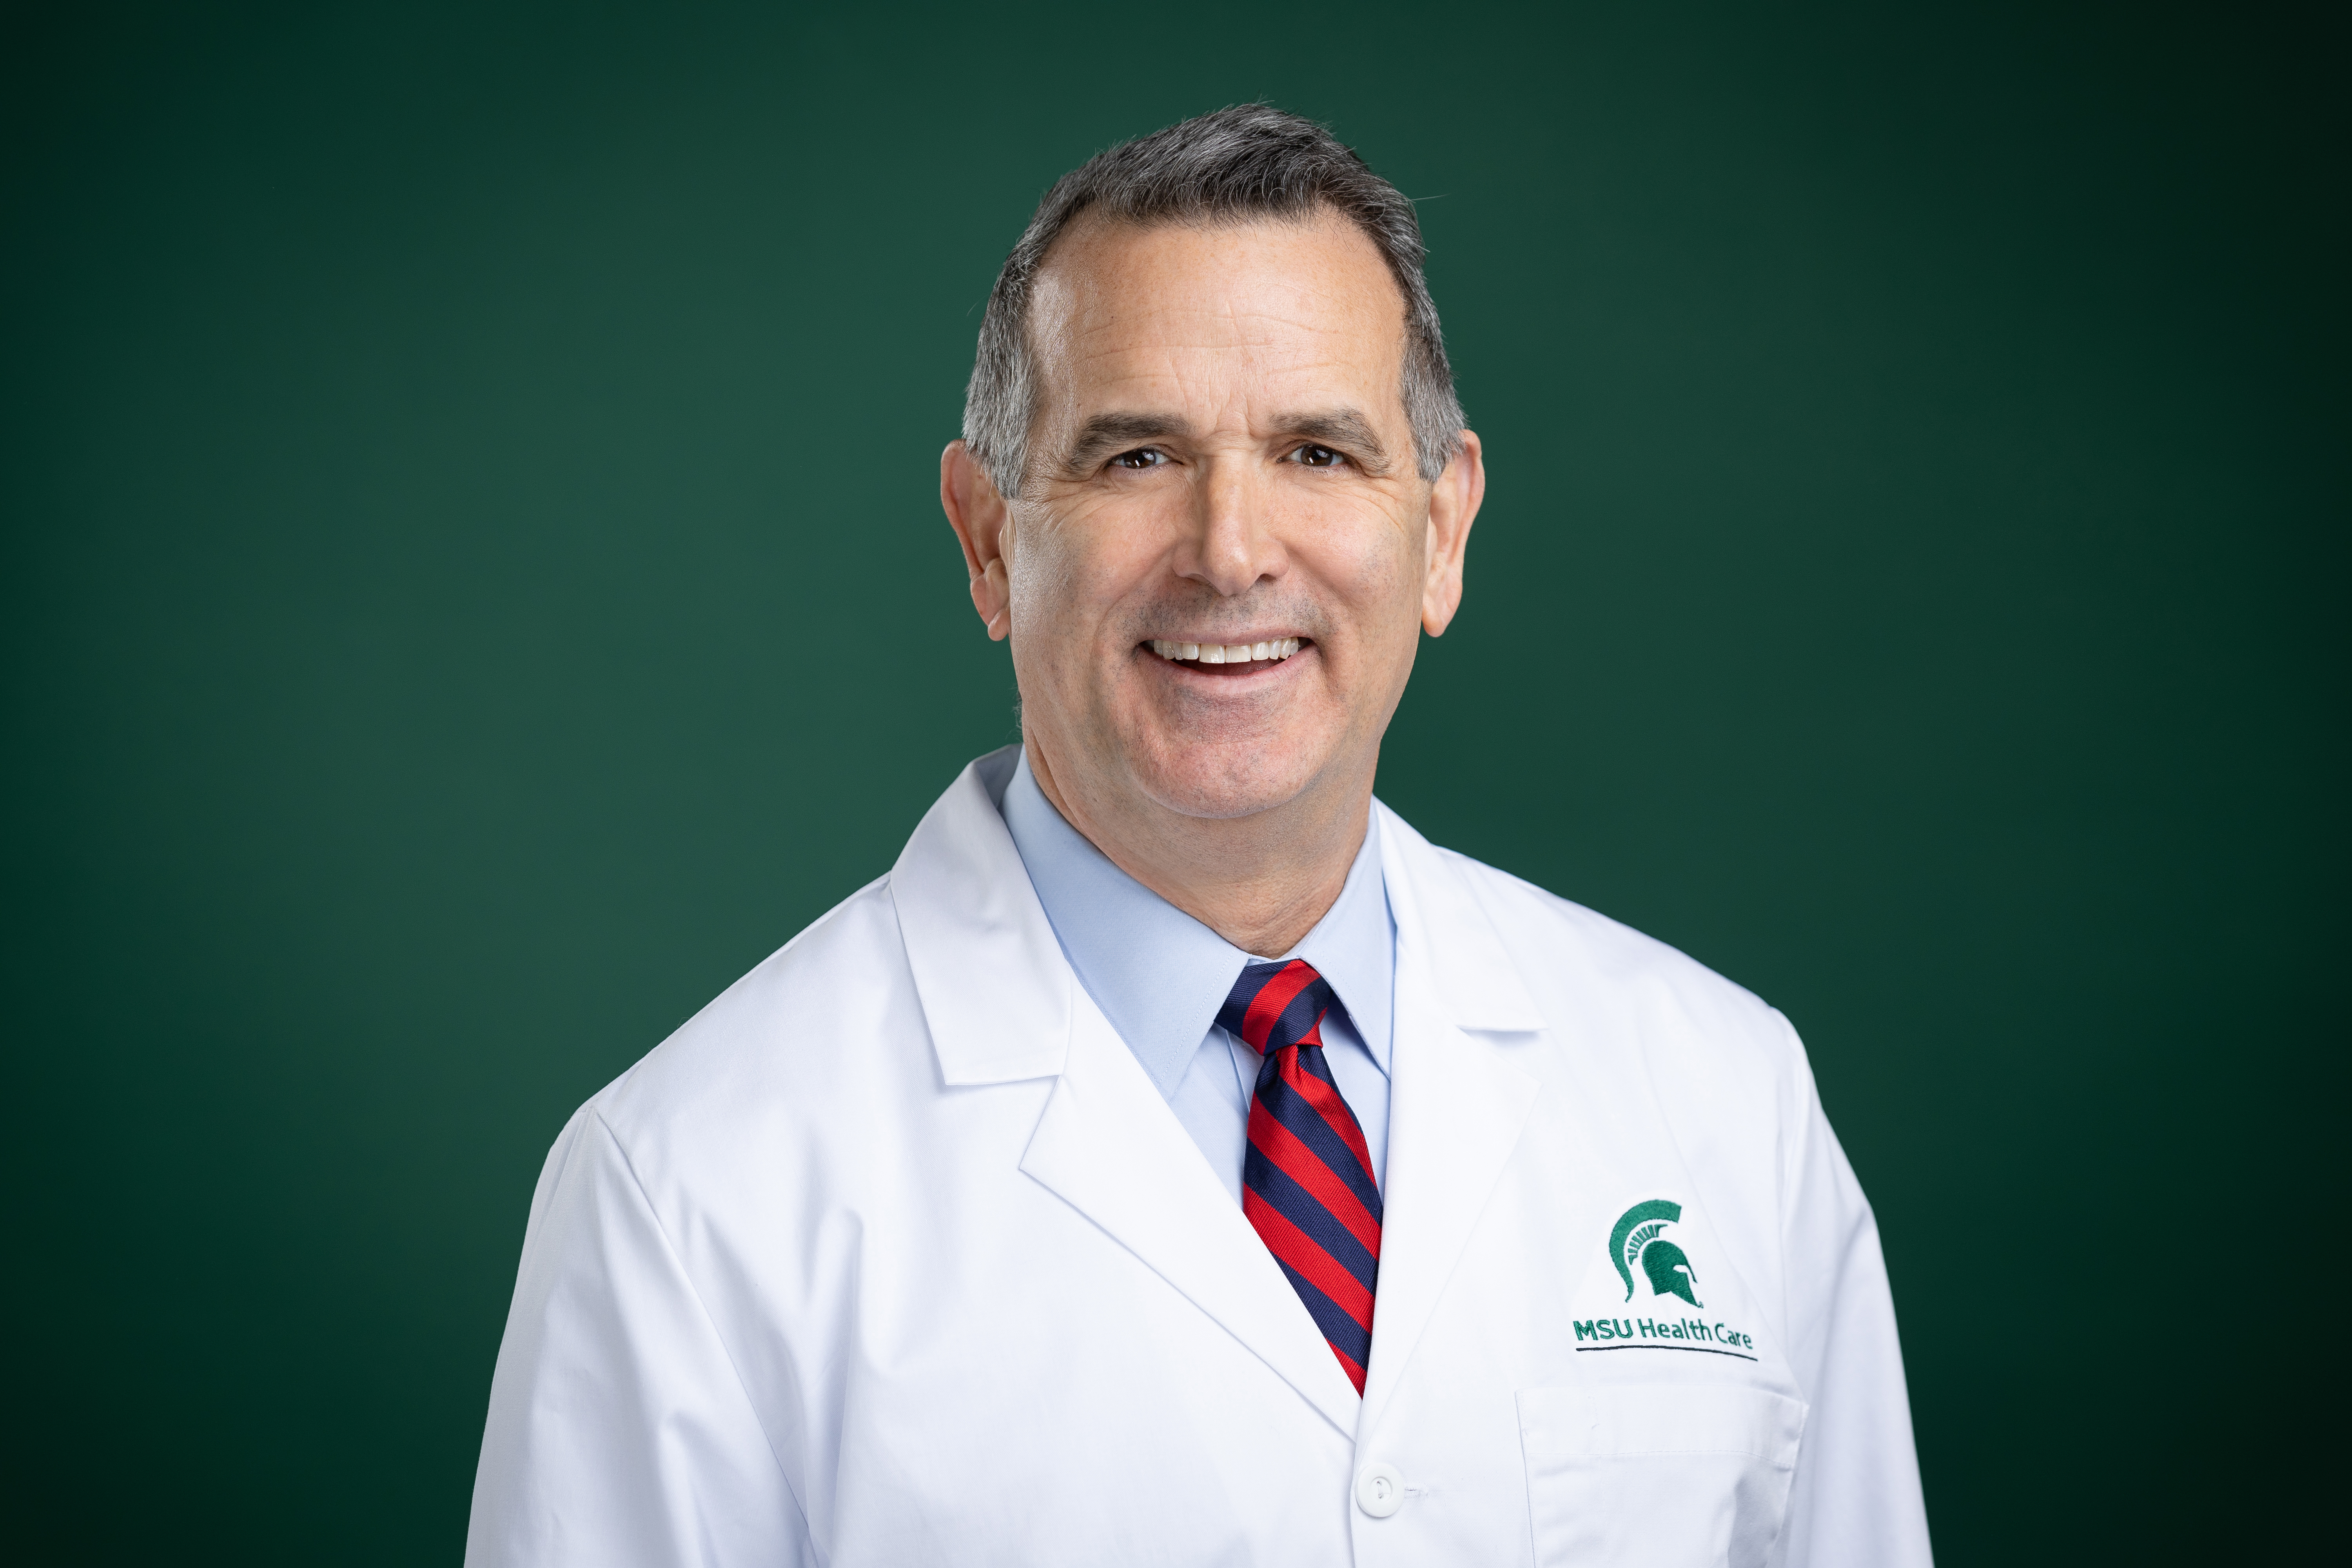 MSU Health Care Chief Medical Officer Michael Weiner, DO